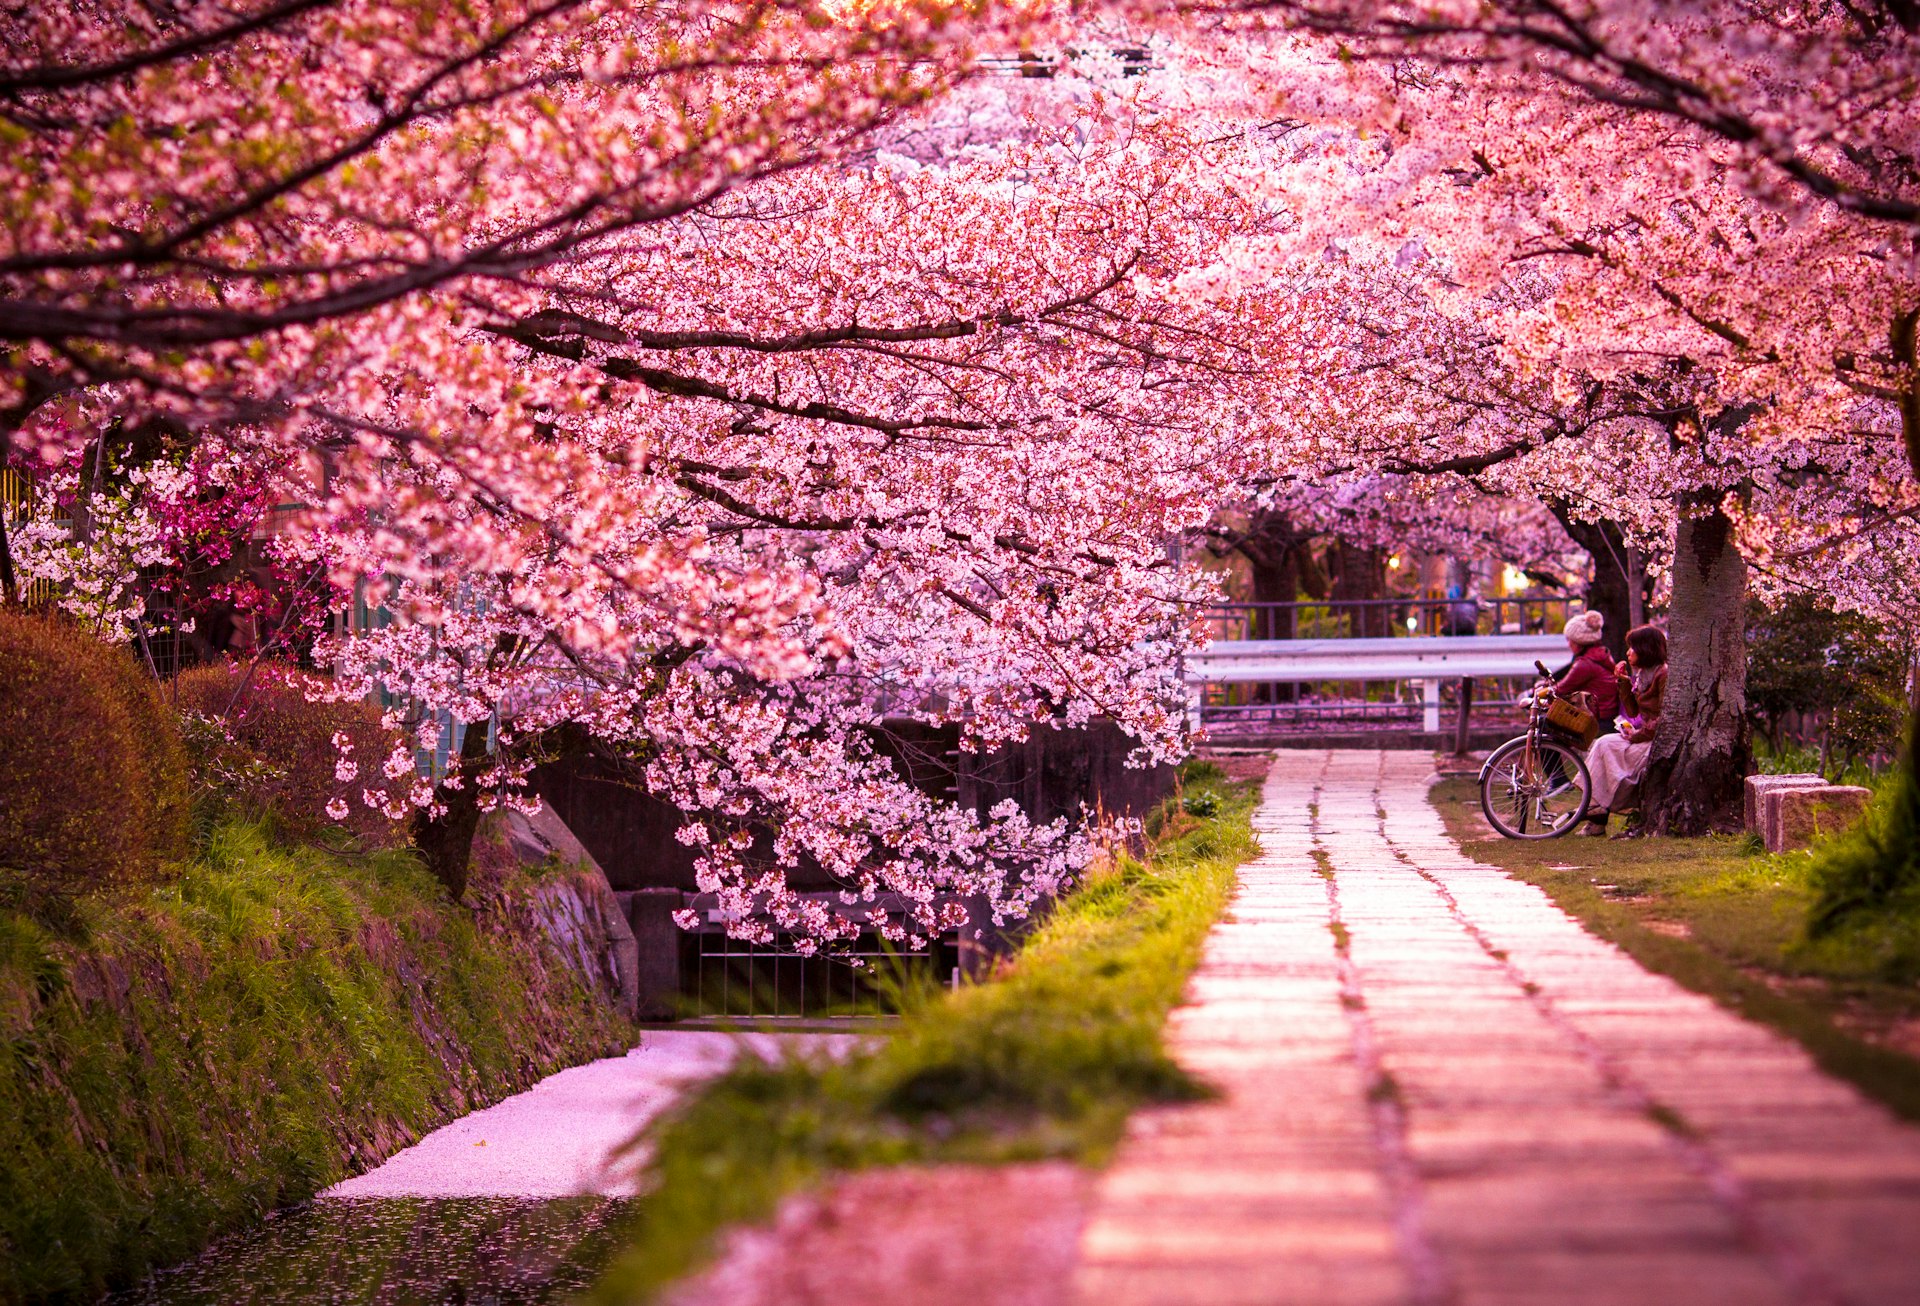 Cherry blossoms line the Philosopher's Path through the northern part of Kyoto's Higashiyama district in Japan